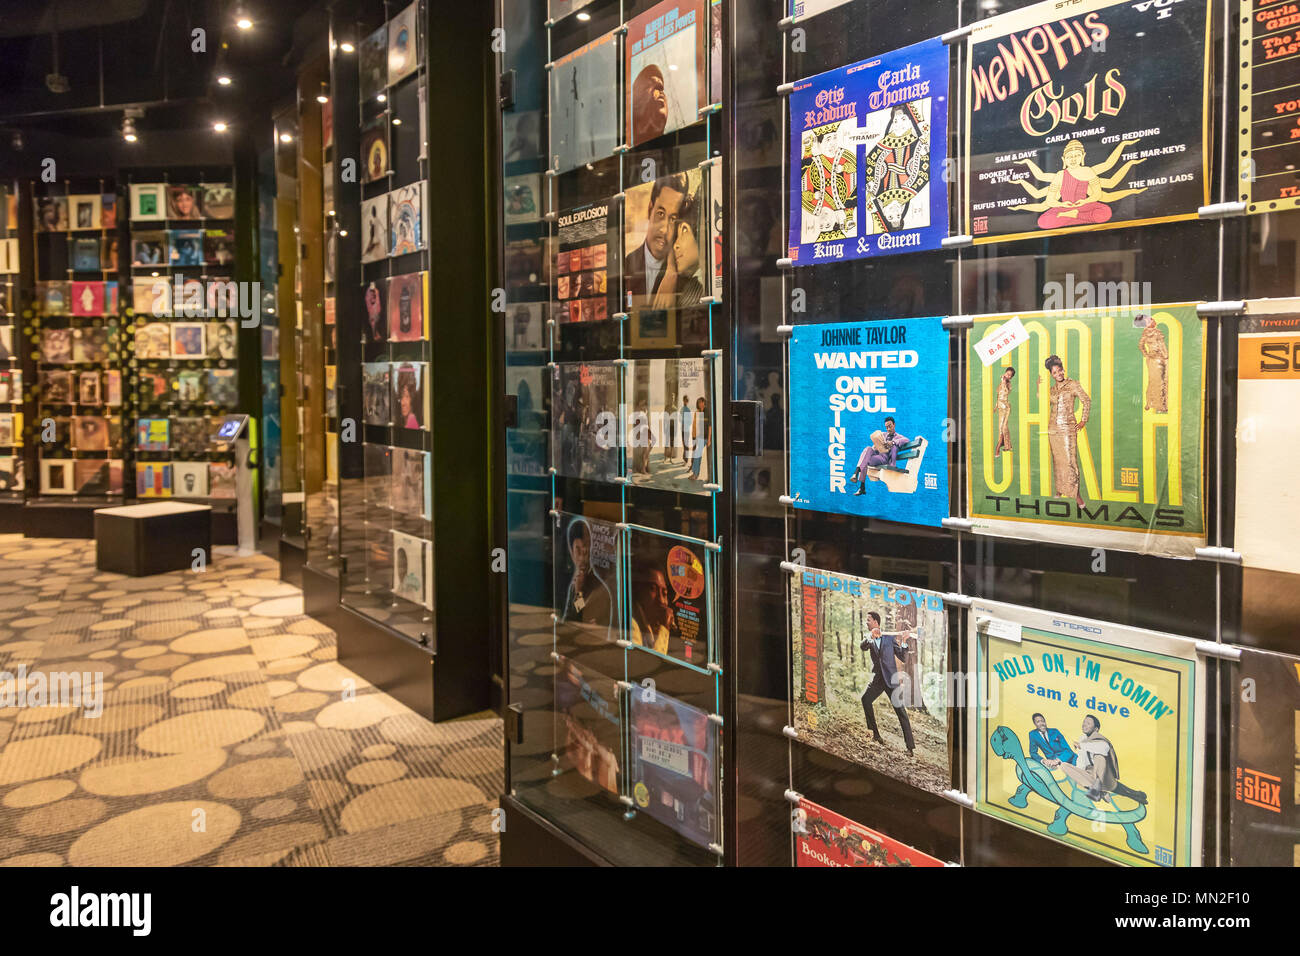 Memphis, Tennessee - Stax album covers on display at the Stax Museum of American Soul Music, the former location of Stax Records. Stock Photo